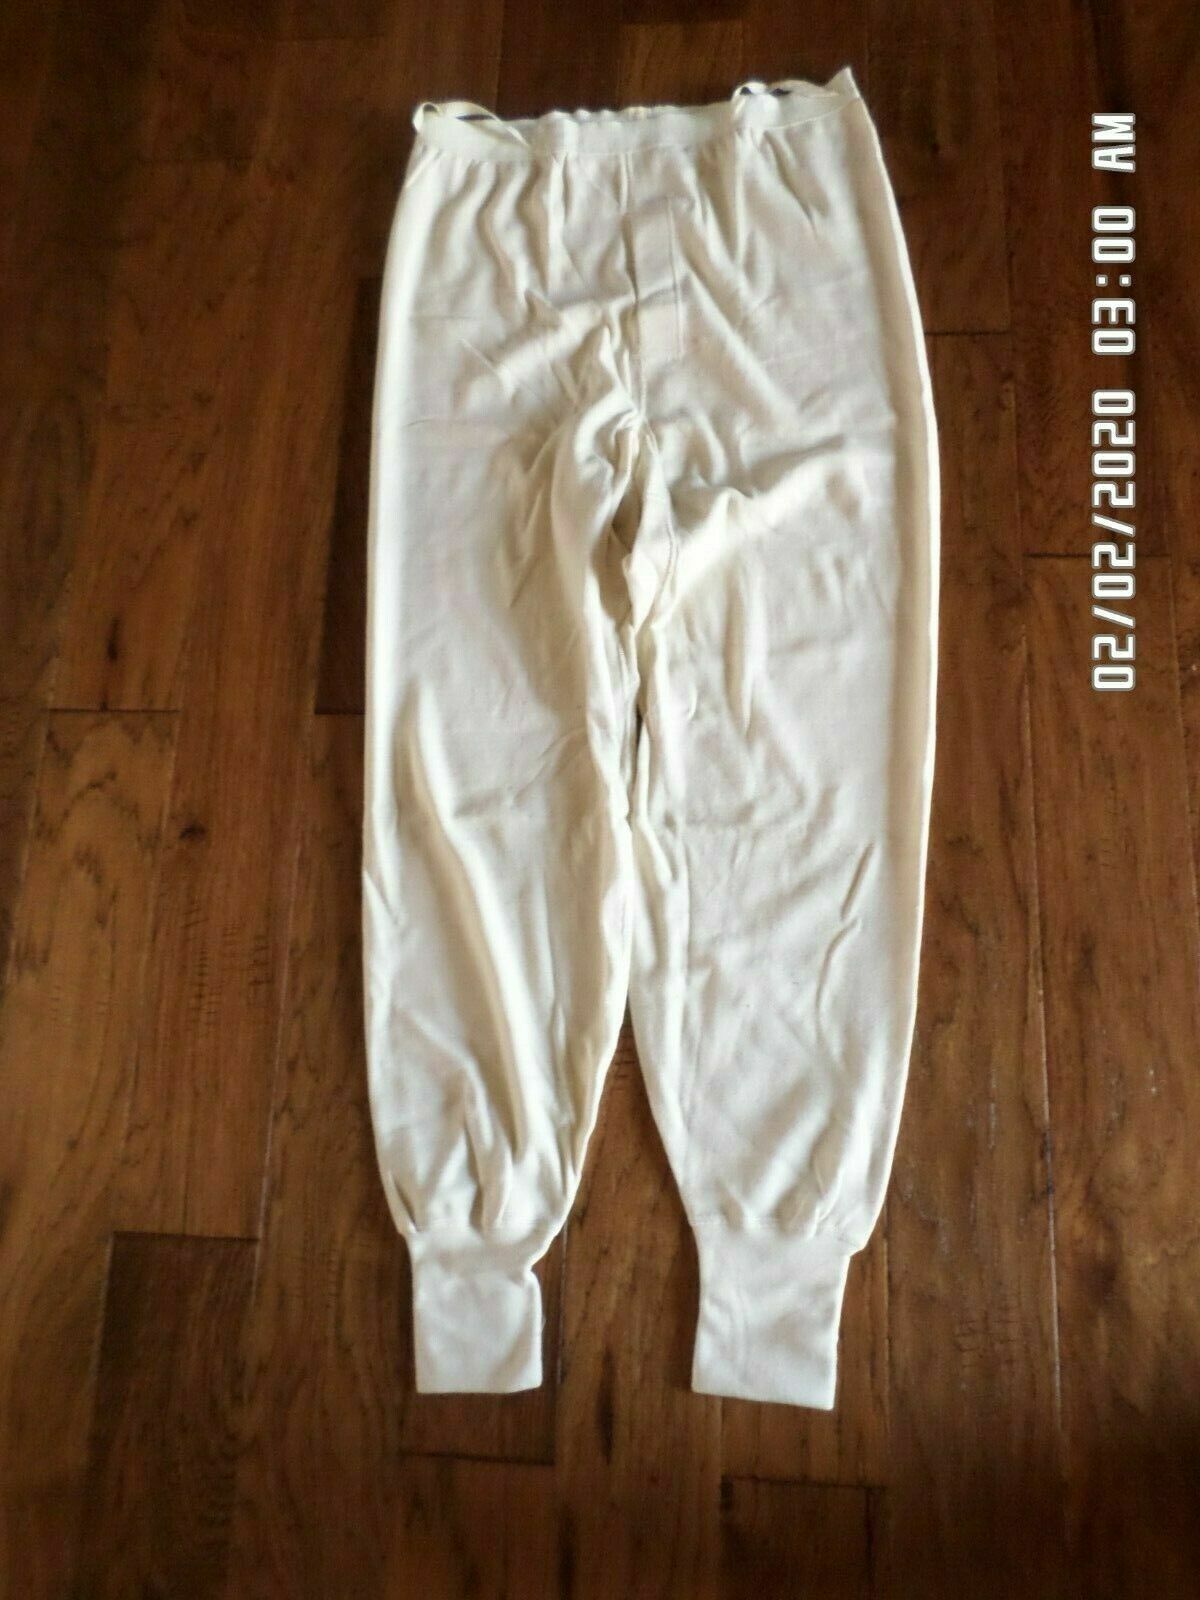 50s Vintage Military Winter Drawers Army Long Johns Military Issued  Underwear off White Size M. -  Canada